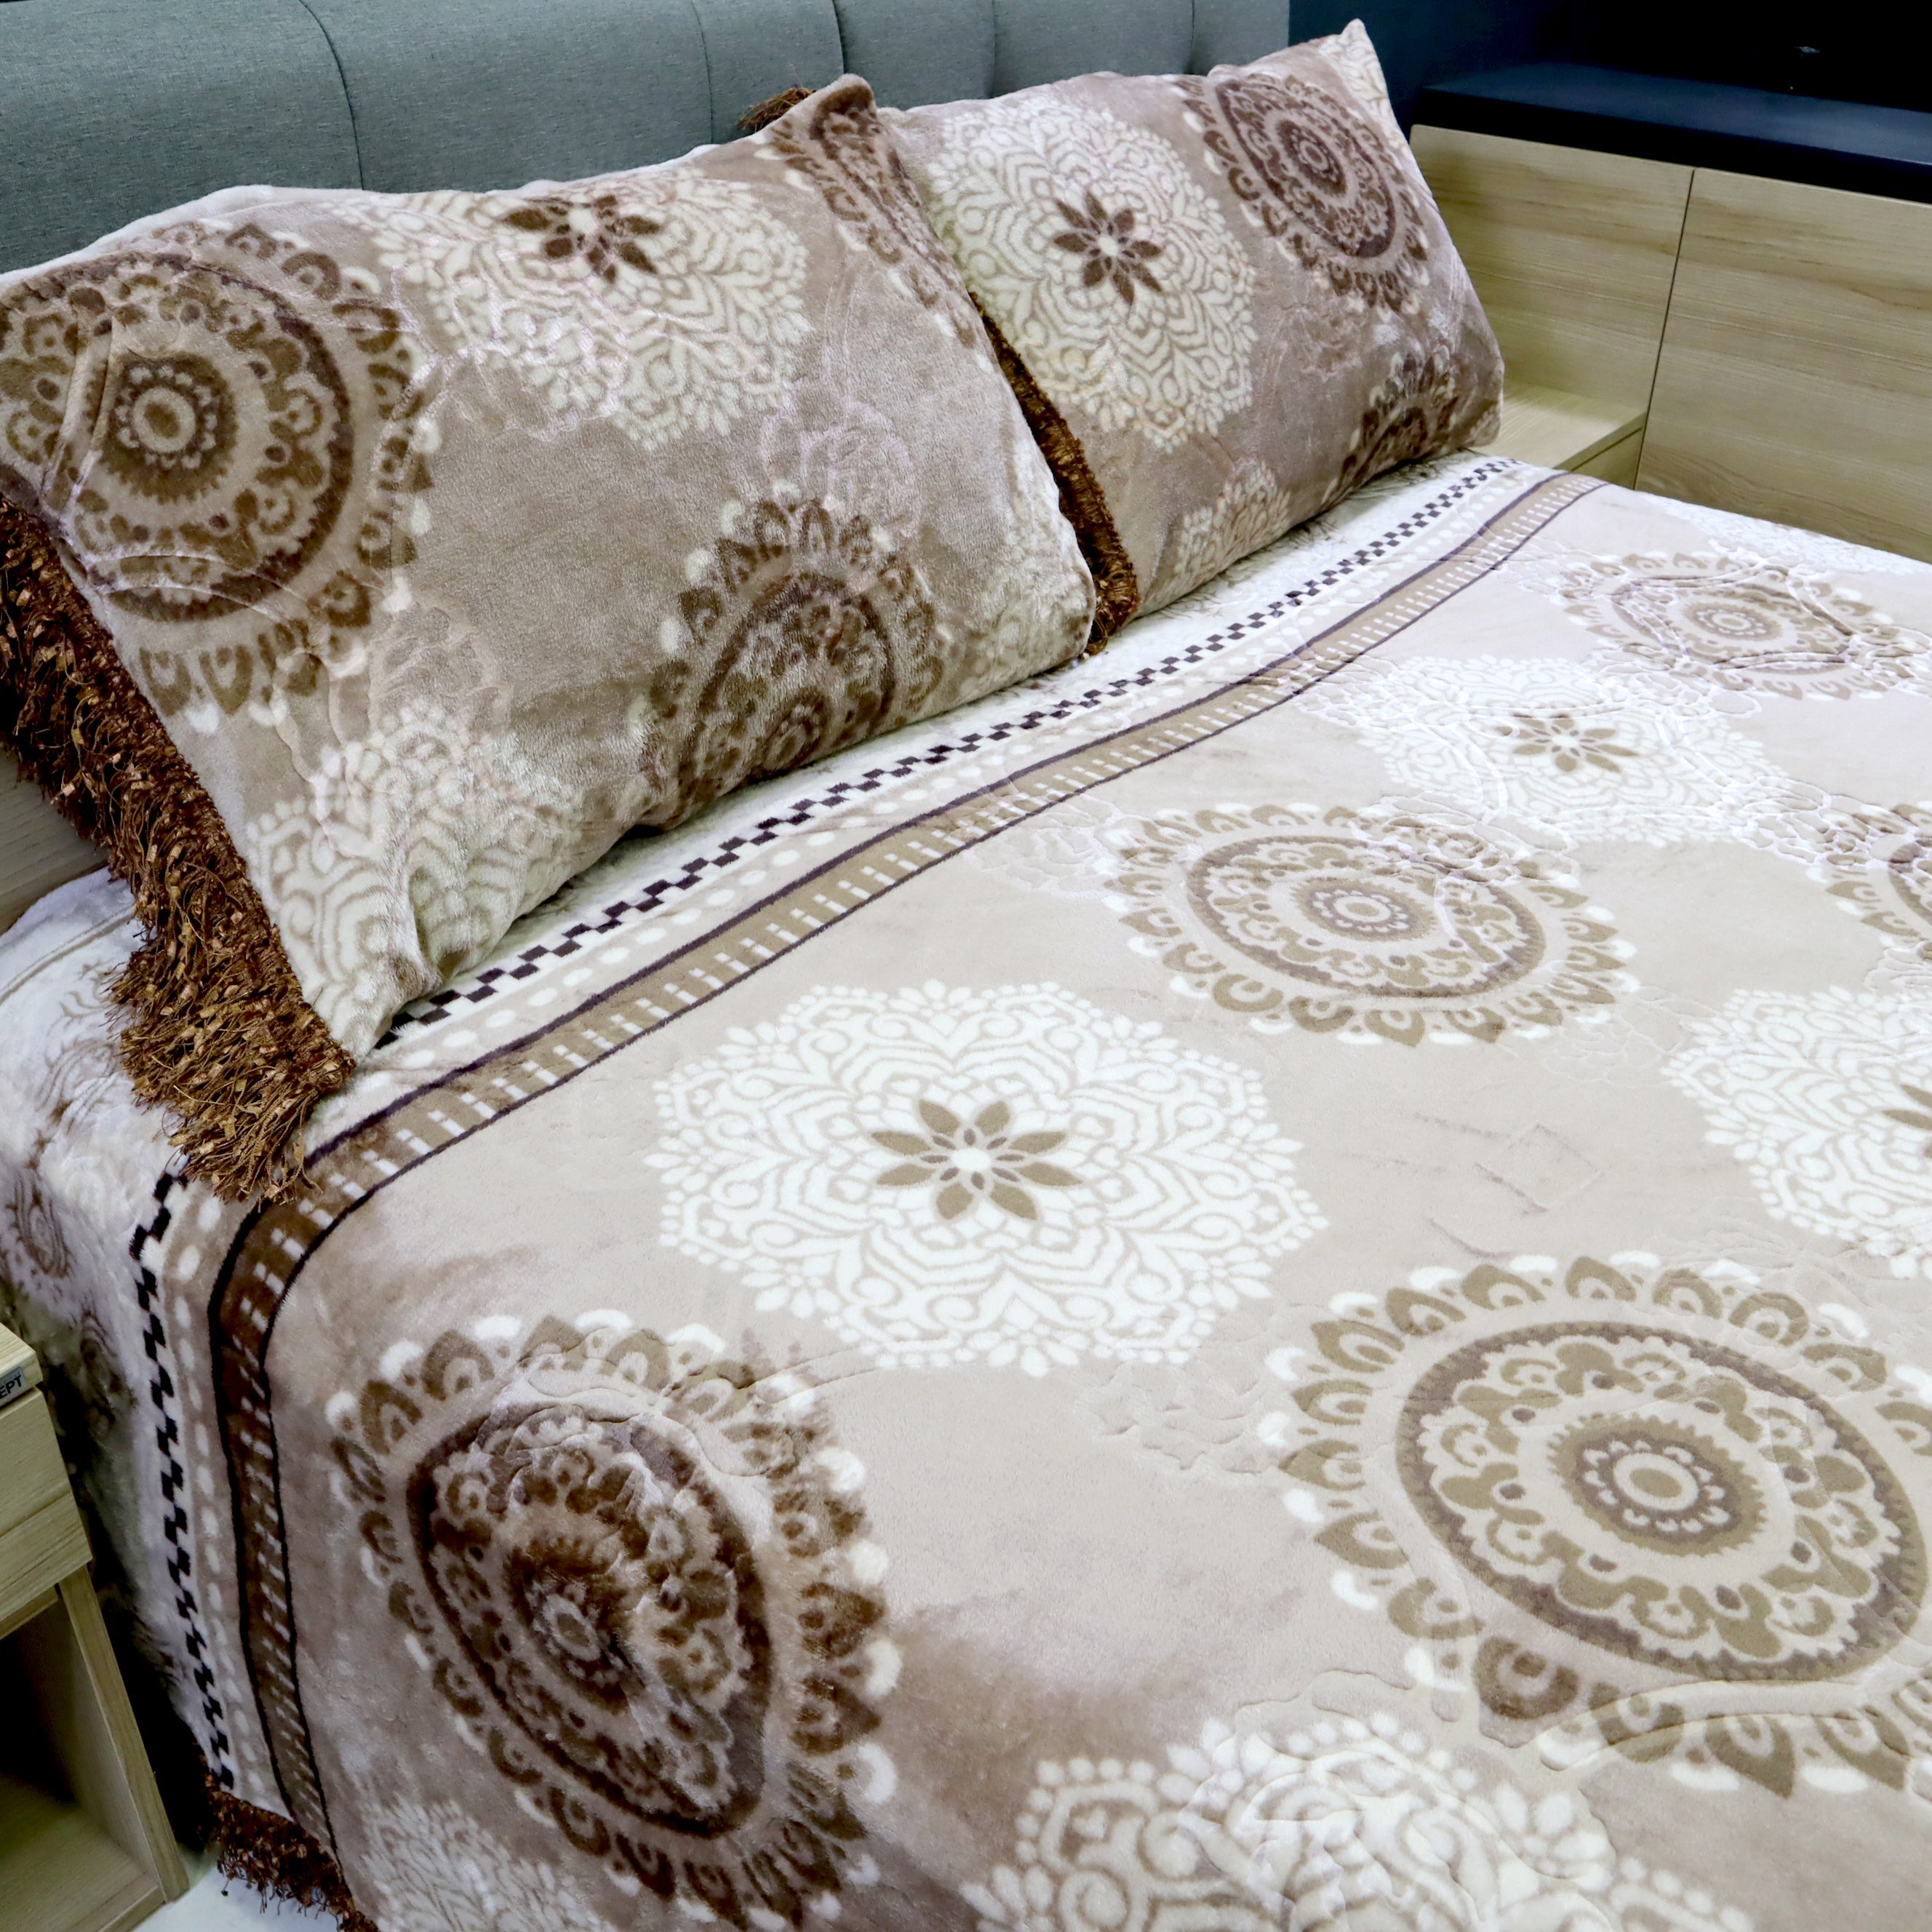 Fluffy 3 Pieces Bed Set- Sandy